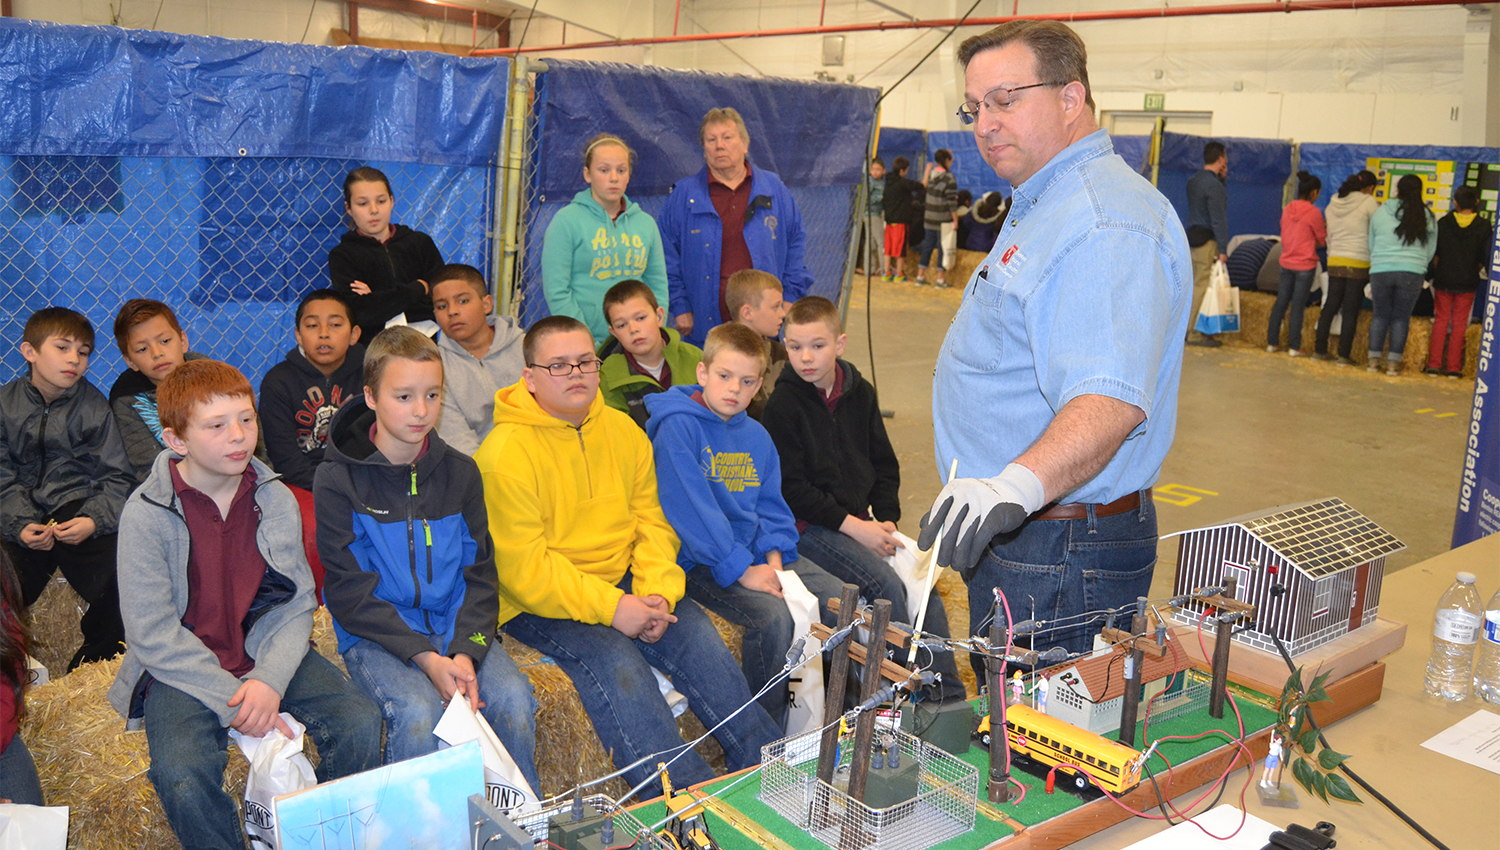 A Benton REA employee demonstrates electrical safety to a group of elementary school students